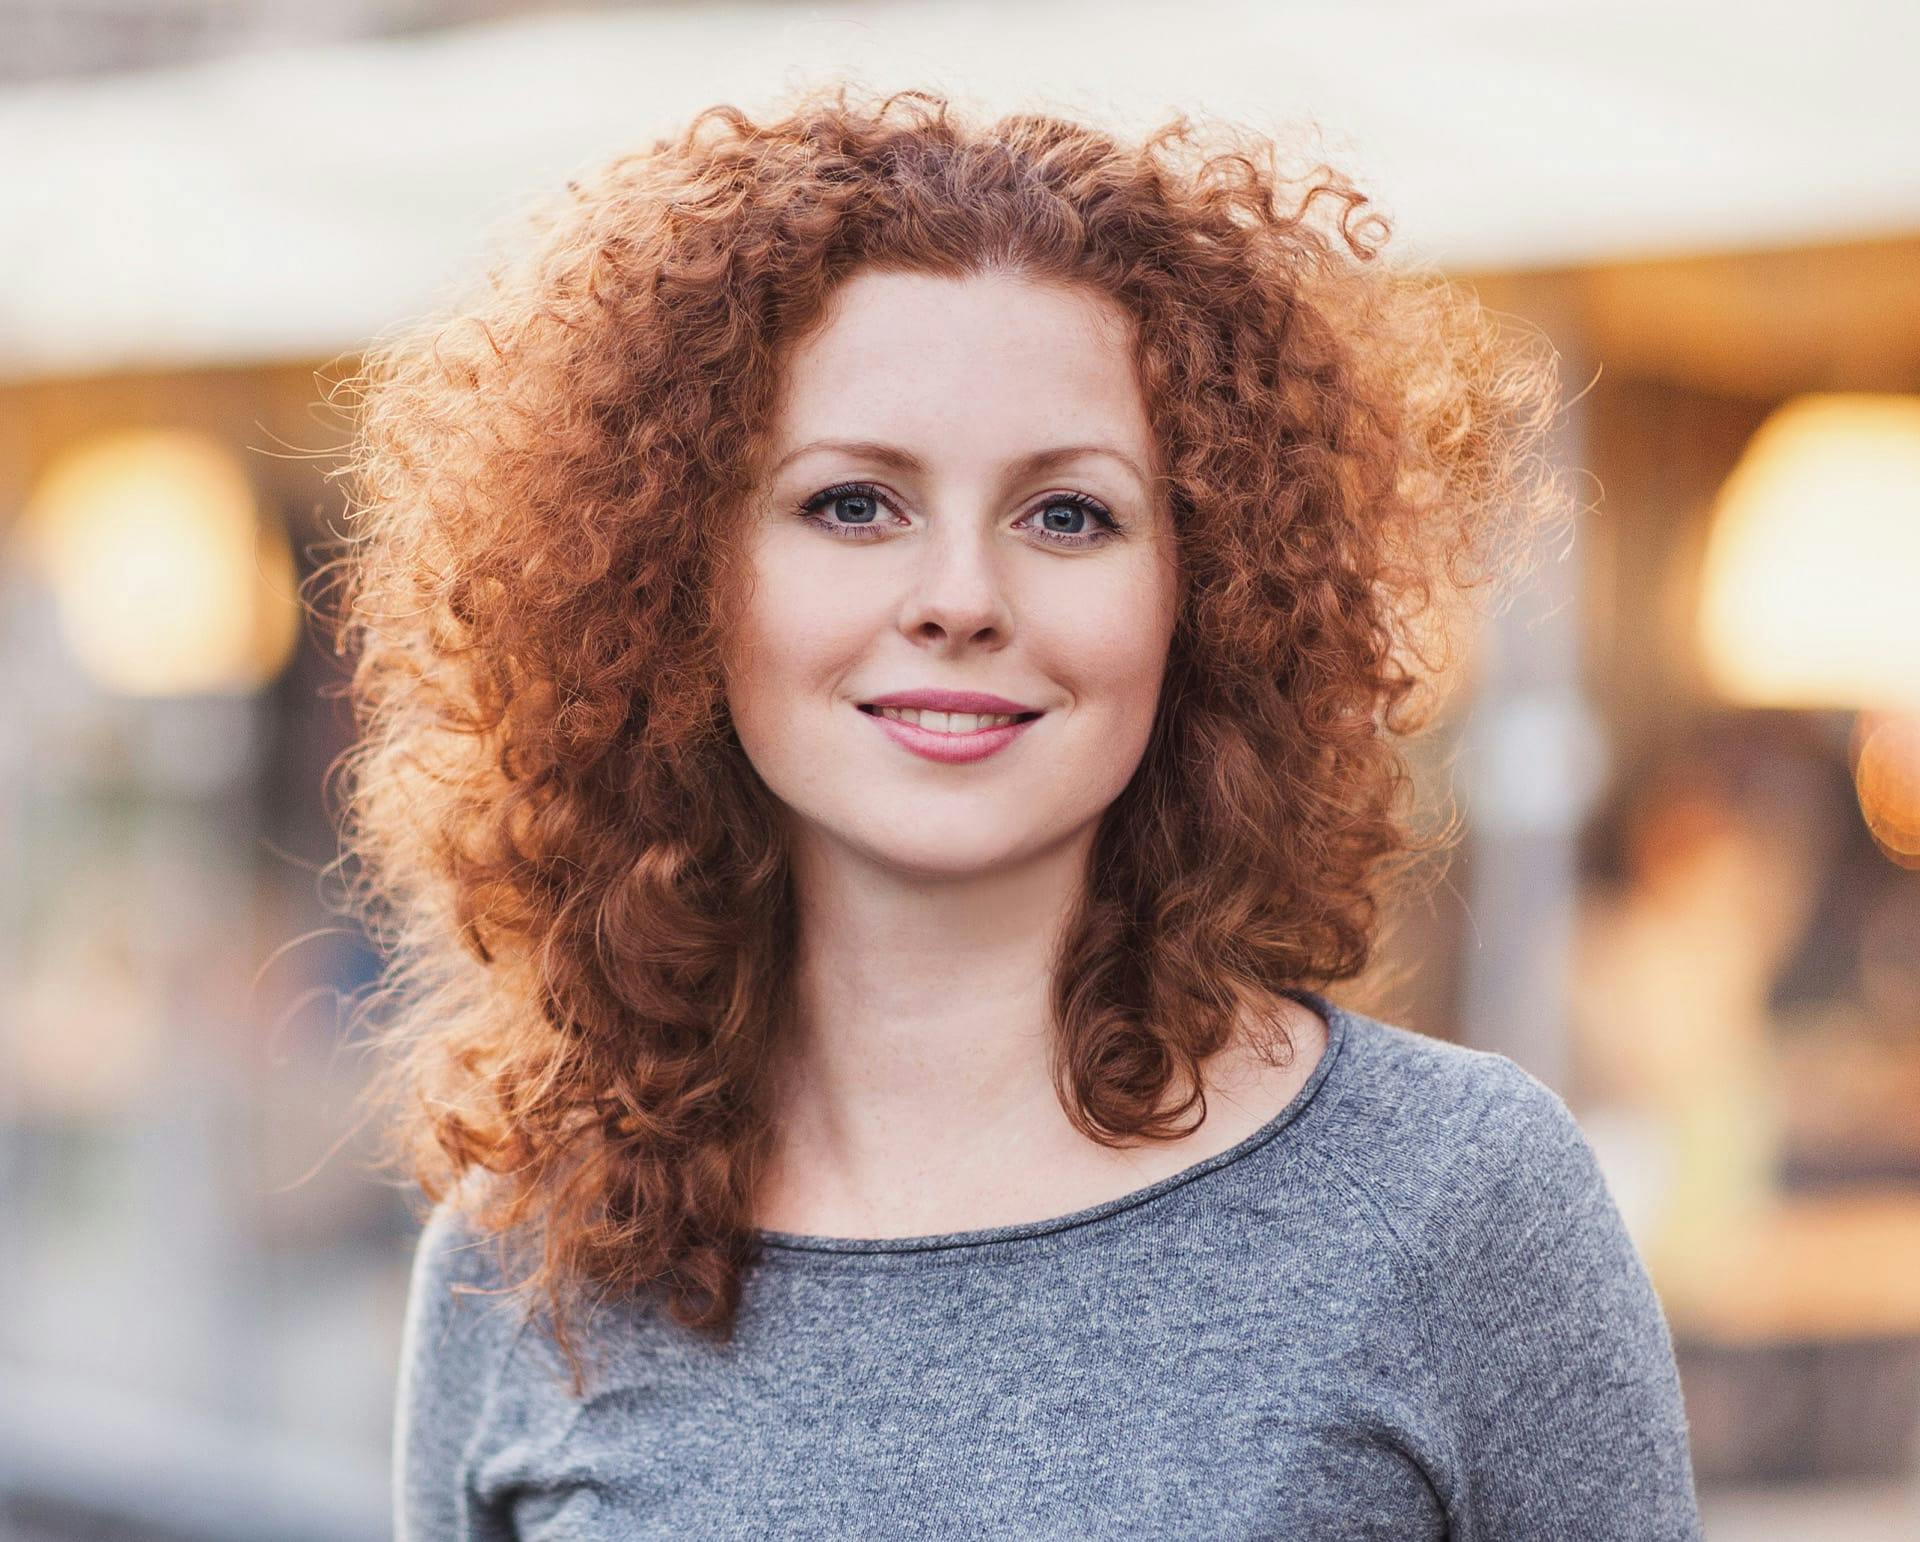 Woman with curly orange hair